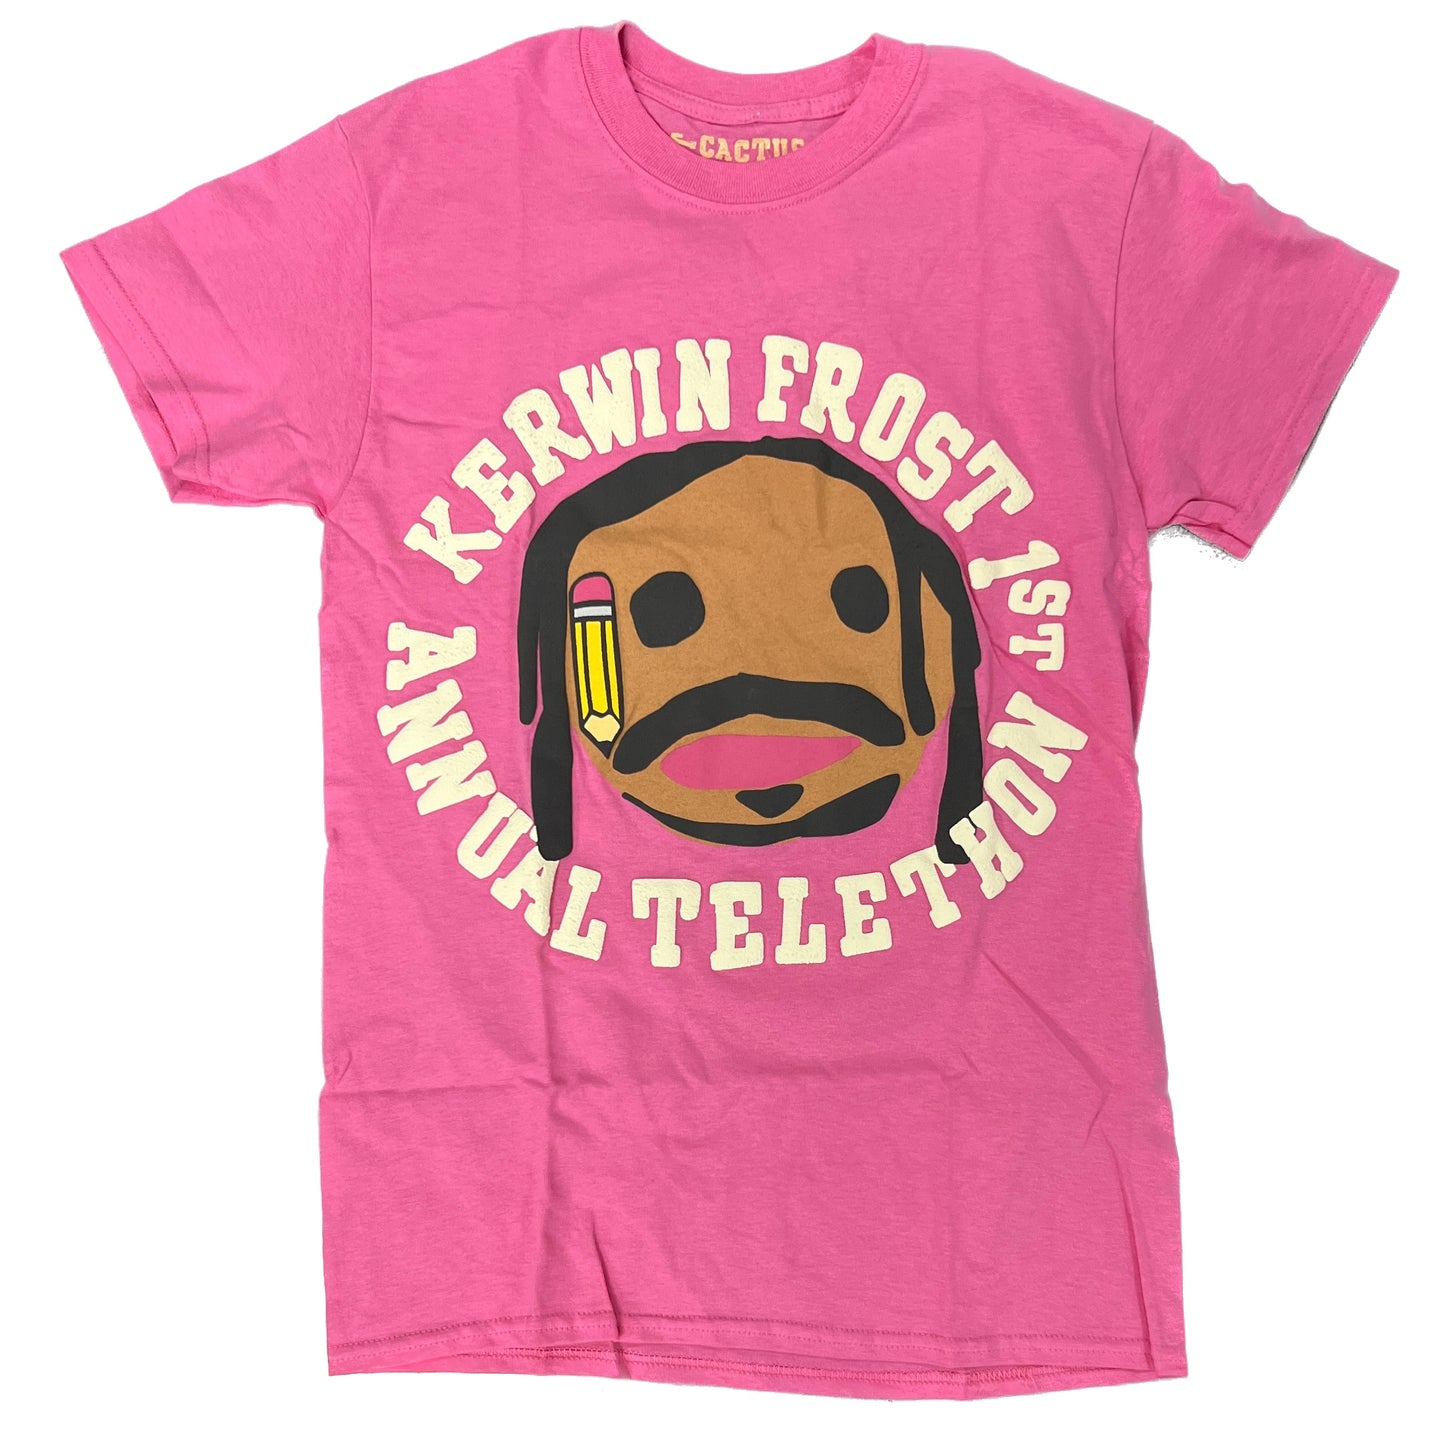 Kerwin Frost CPFM Pink Tee